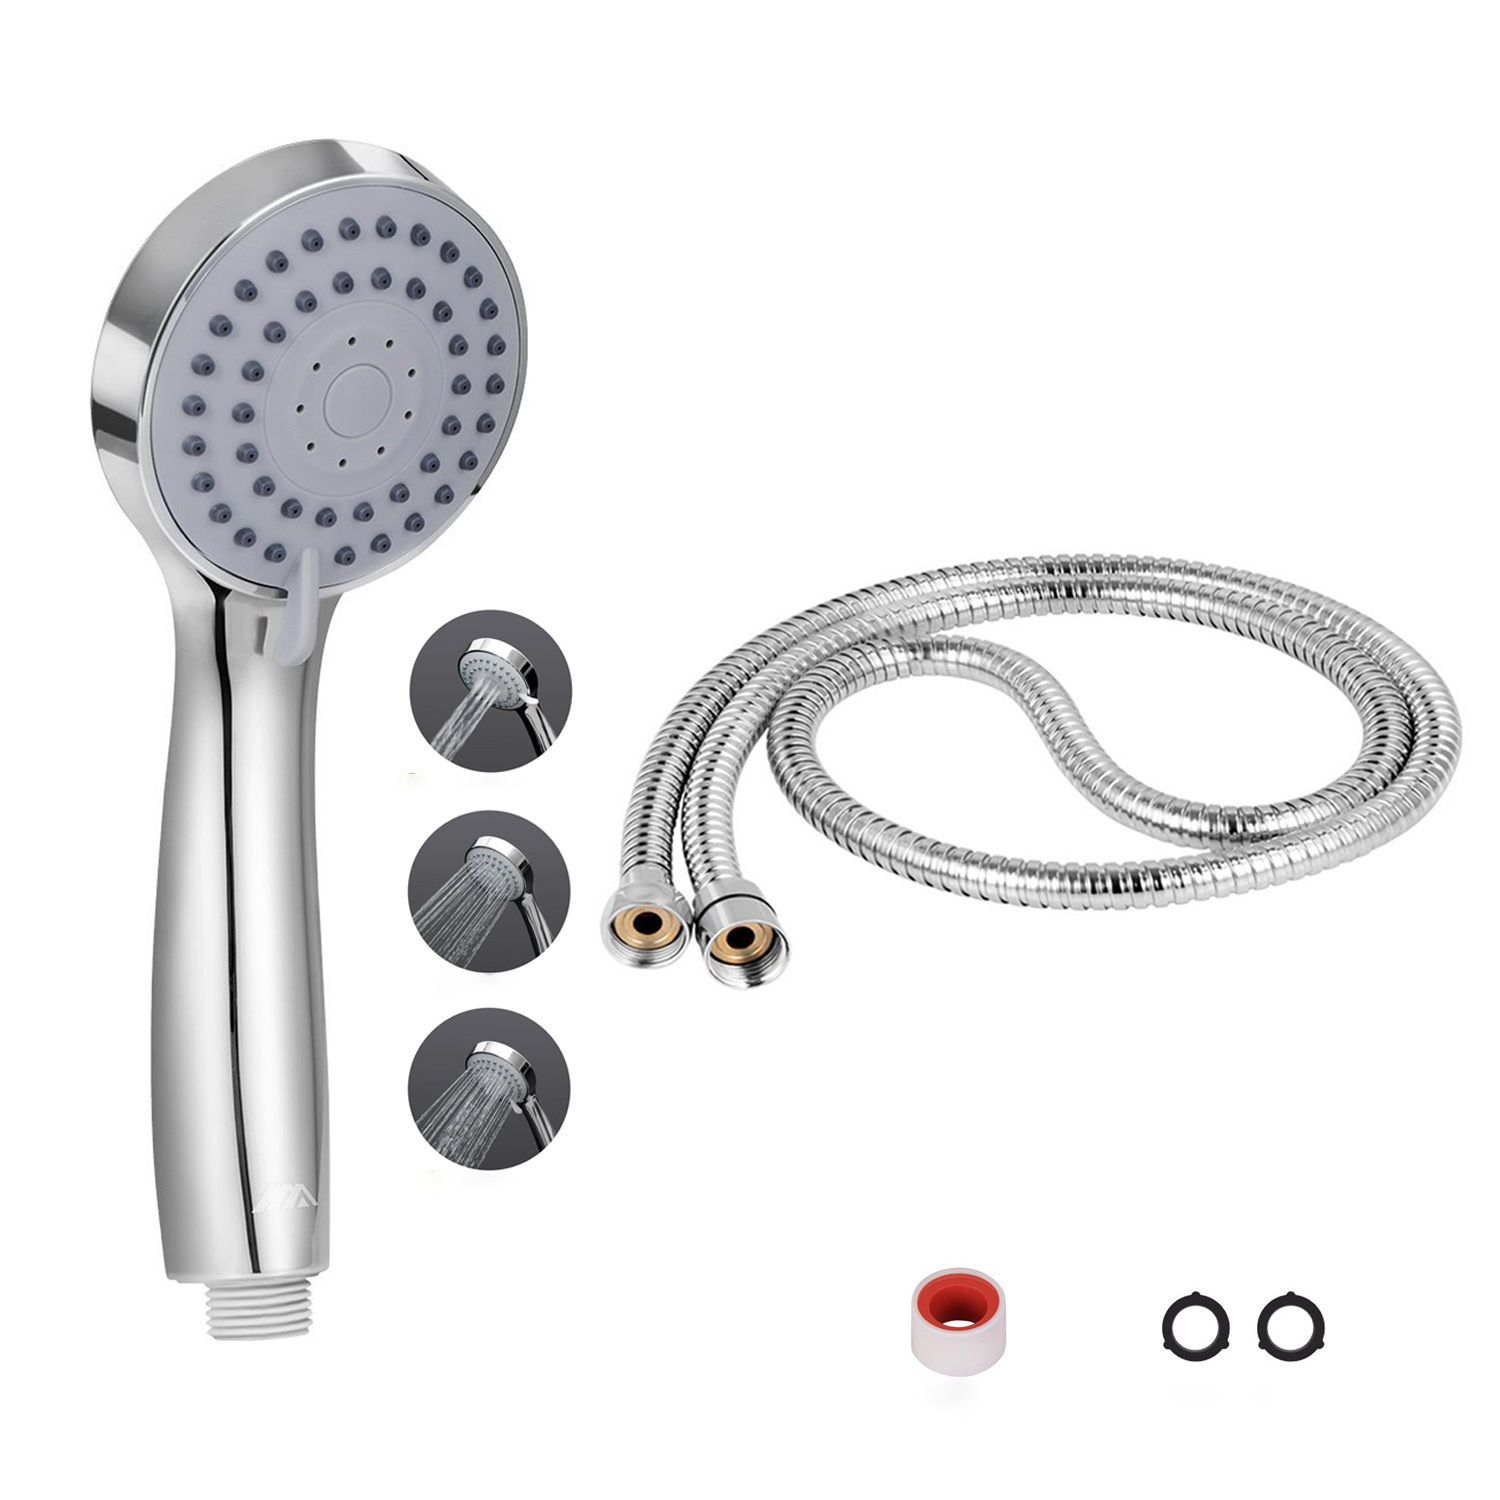 Aisoso Handheld Shower Head High Pressure with Hose Bracket and 3 Spray Settings 